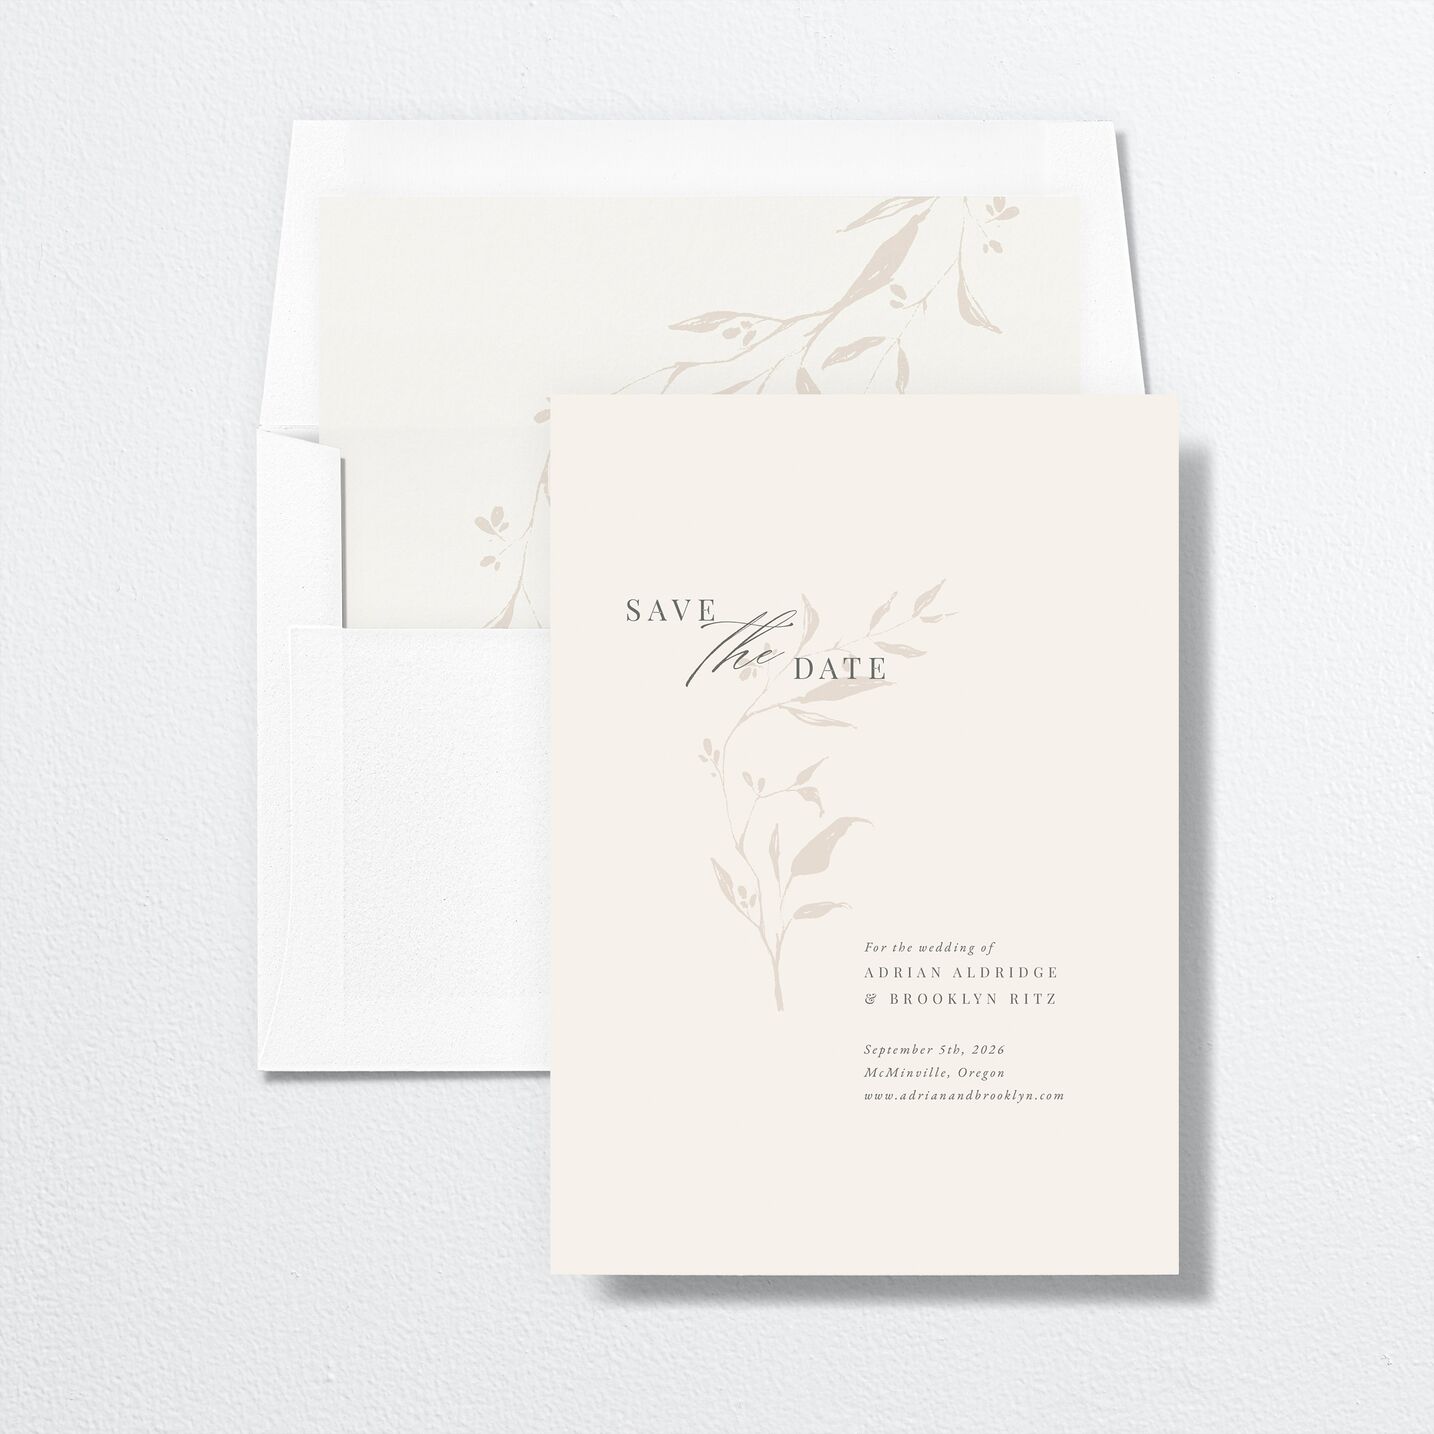 Rustic Minimal Save The Date Cards envelope-and-liner in cream